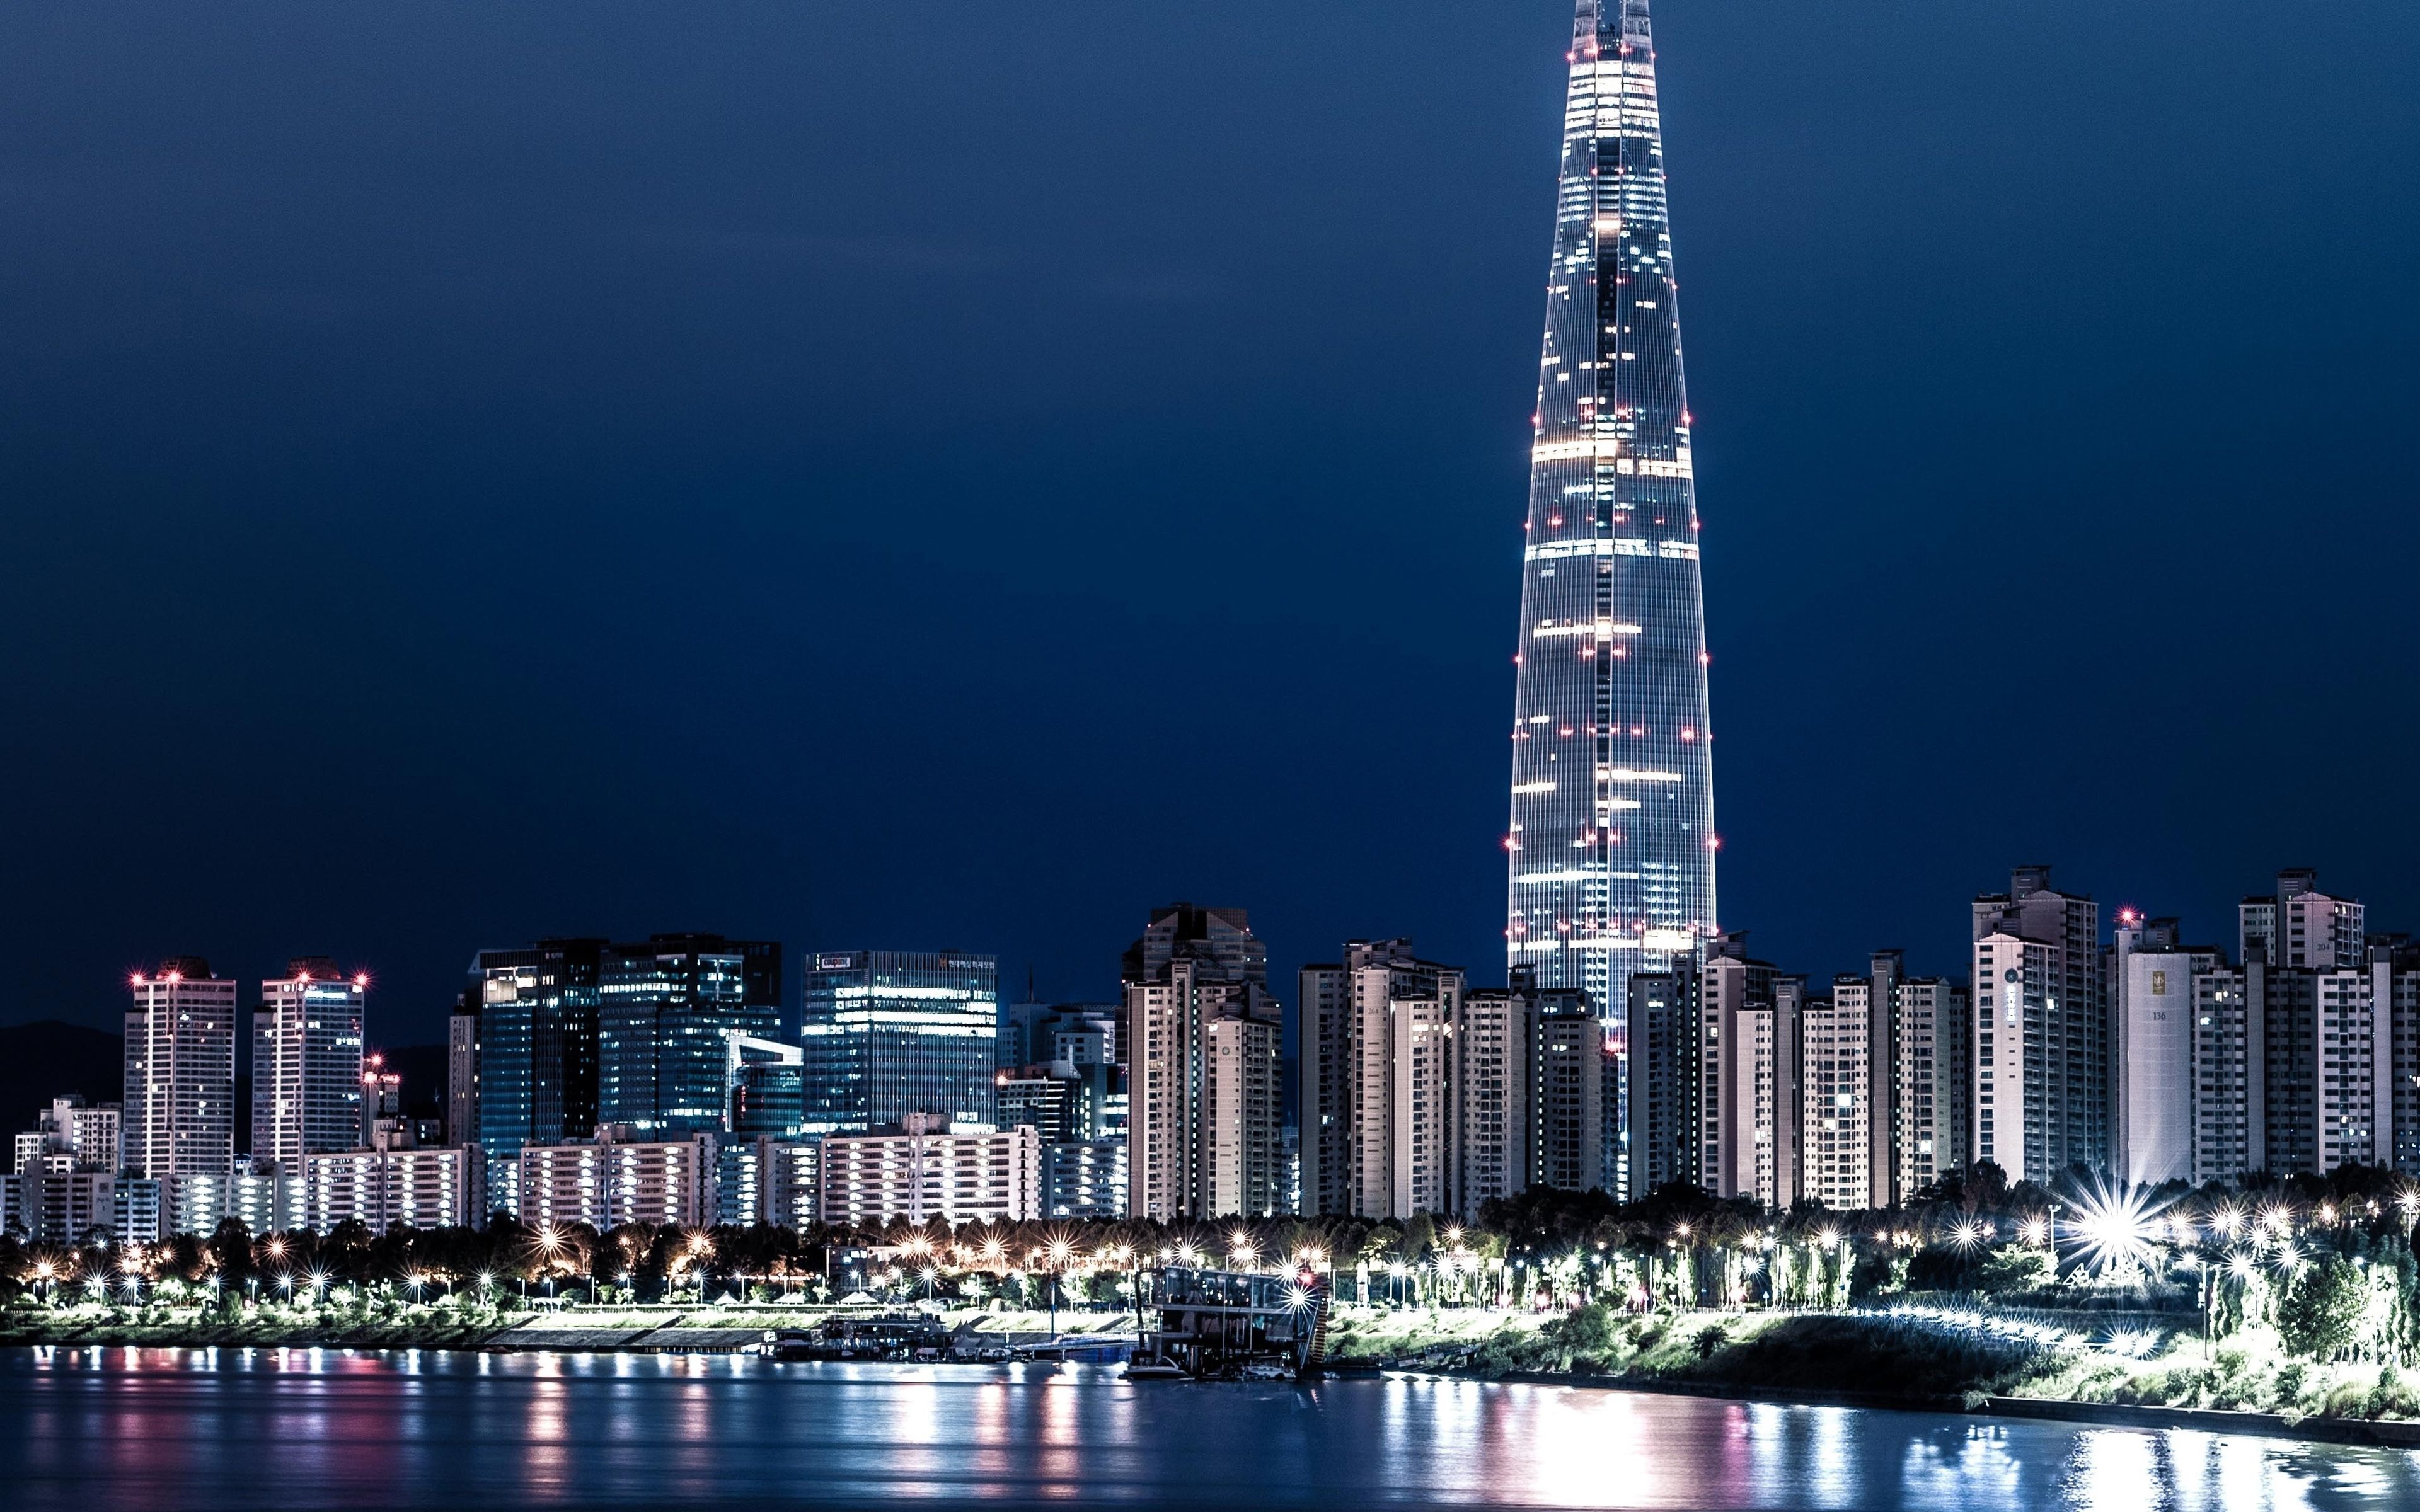 Download wallpaper Seoul, 4k, modern buildings, Lotte World Tower, Han river, nightscapes, South Korea for desktop with resolution 3840x2400. High Quality HD picture wallpaper